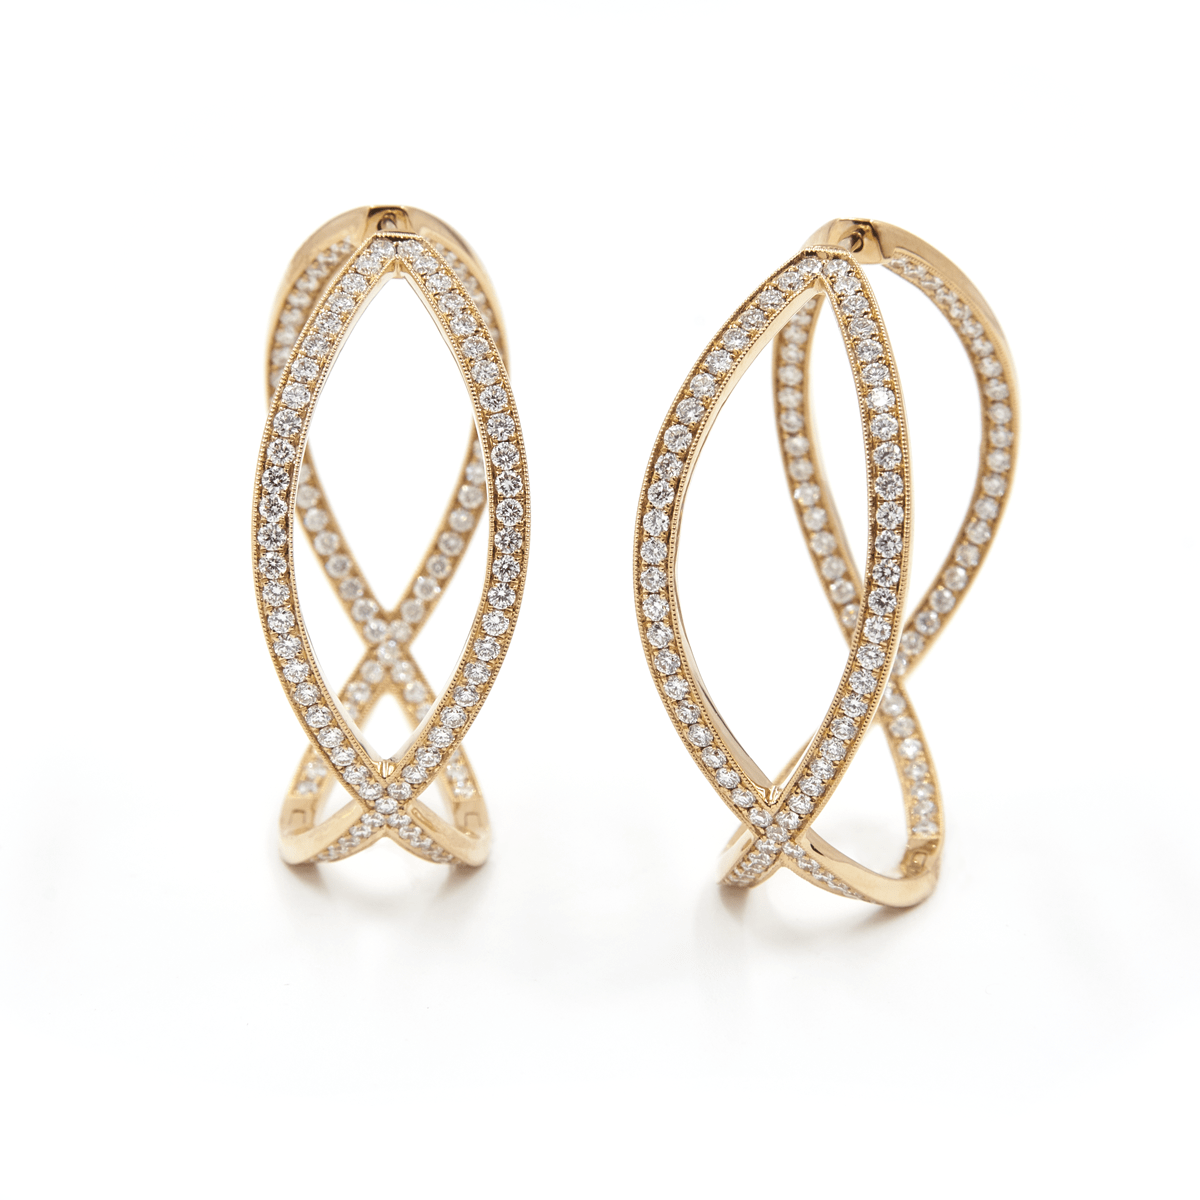 LIFE ETERNAL DIAMOND EARRINGS - Chris Aire Fine Jewelry & Timepieces